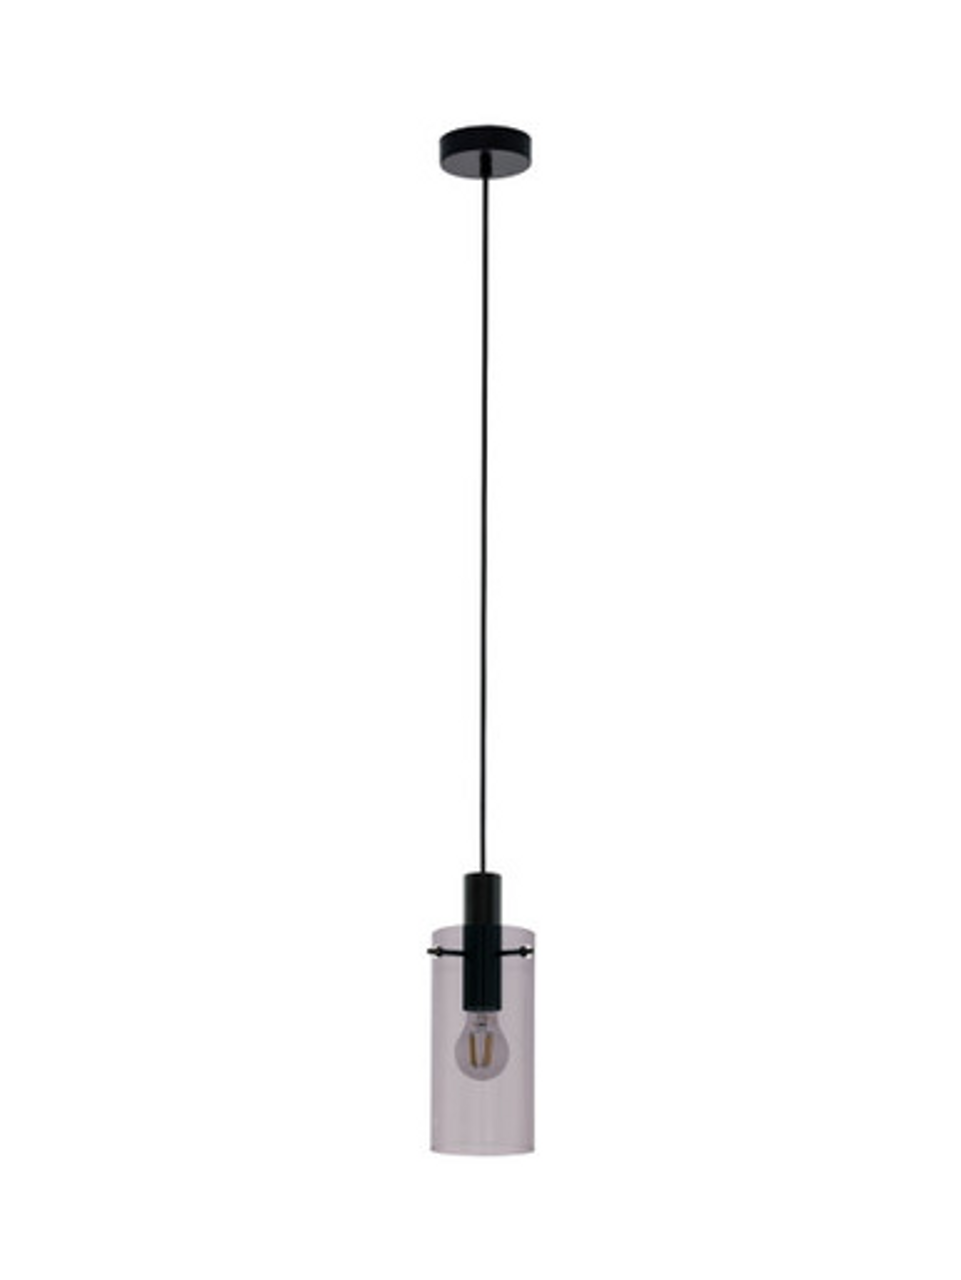 Black pendant with smoke cylinder glass and black suspension